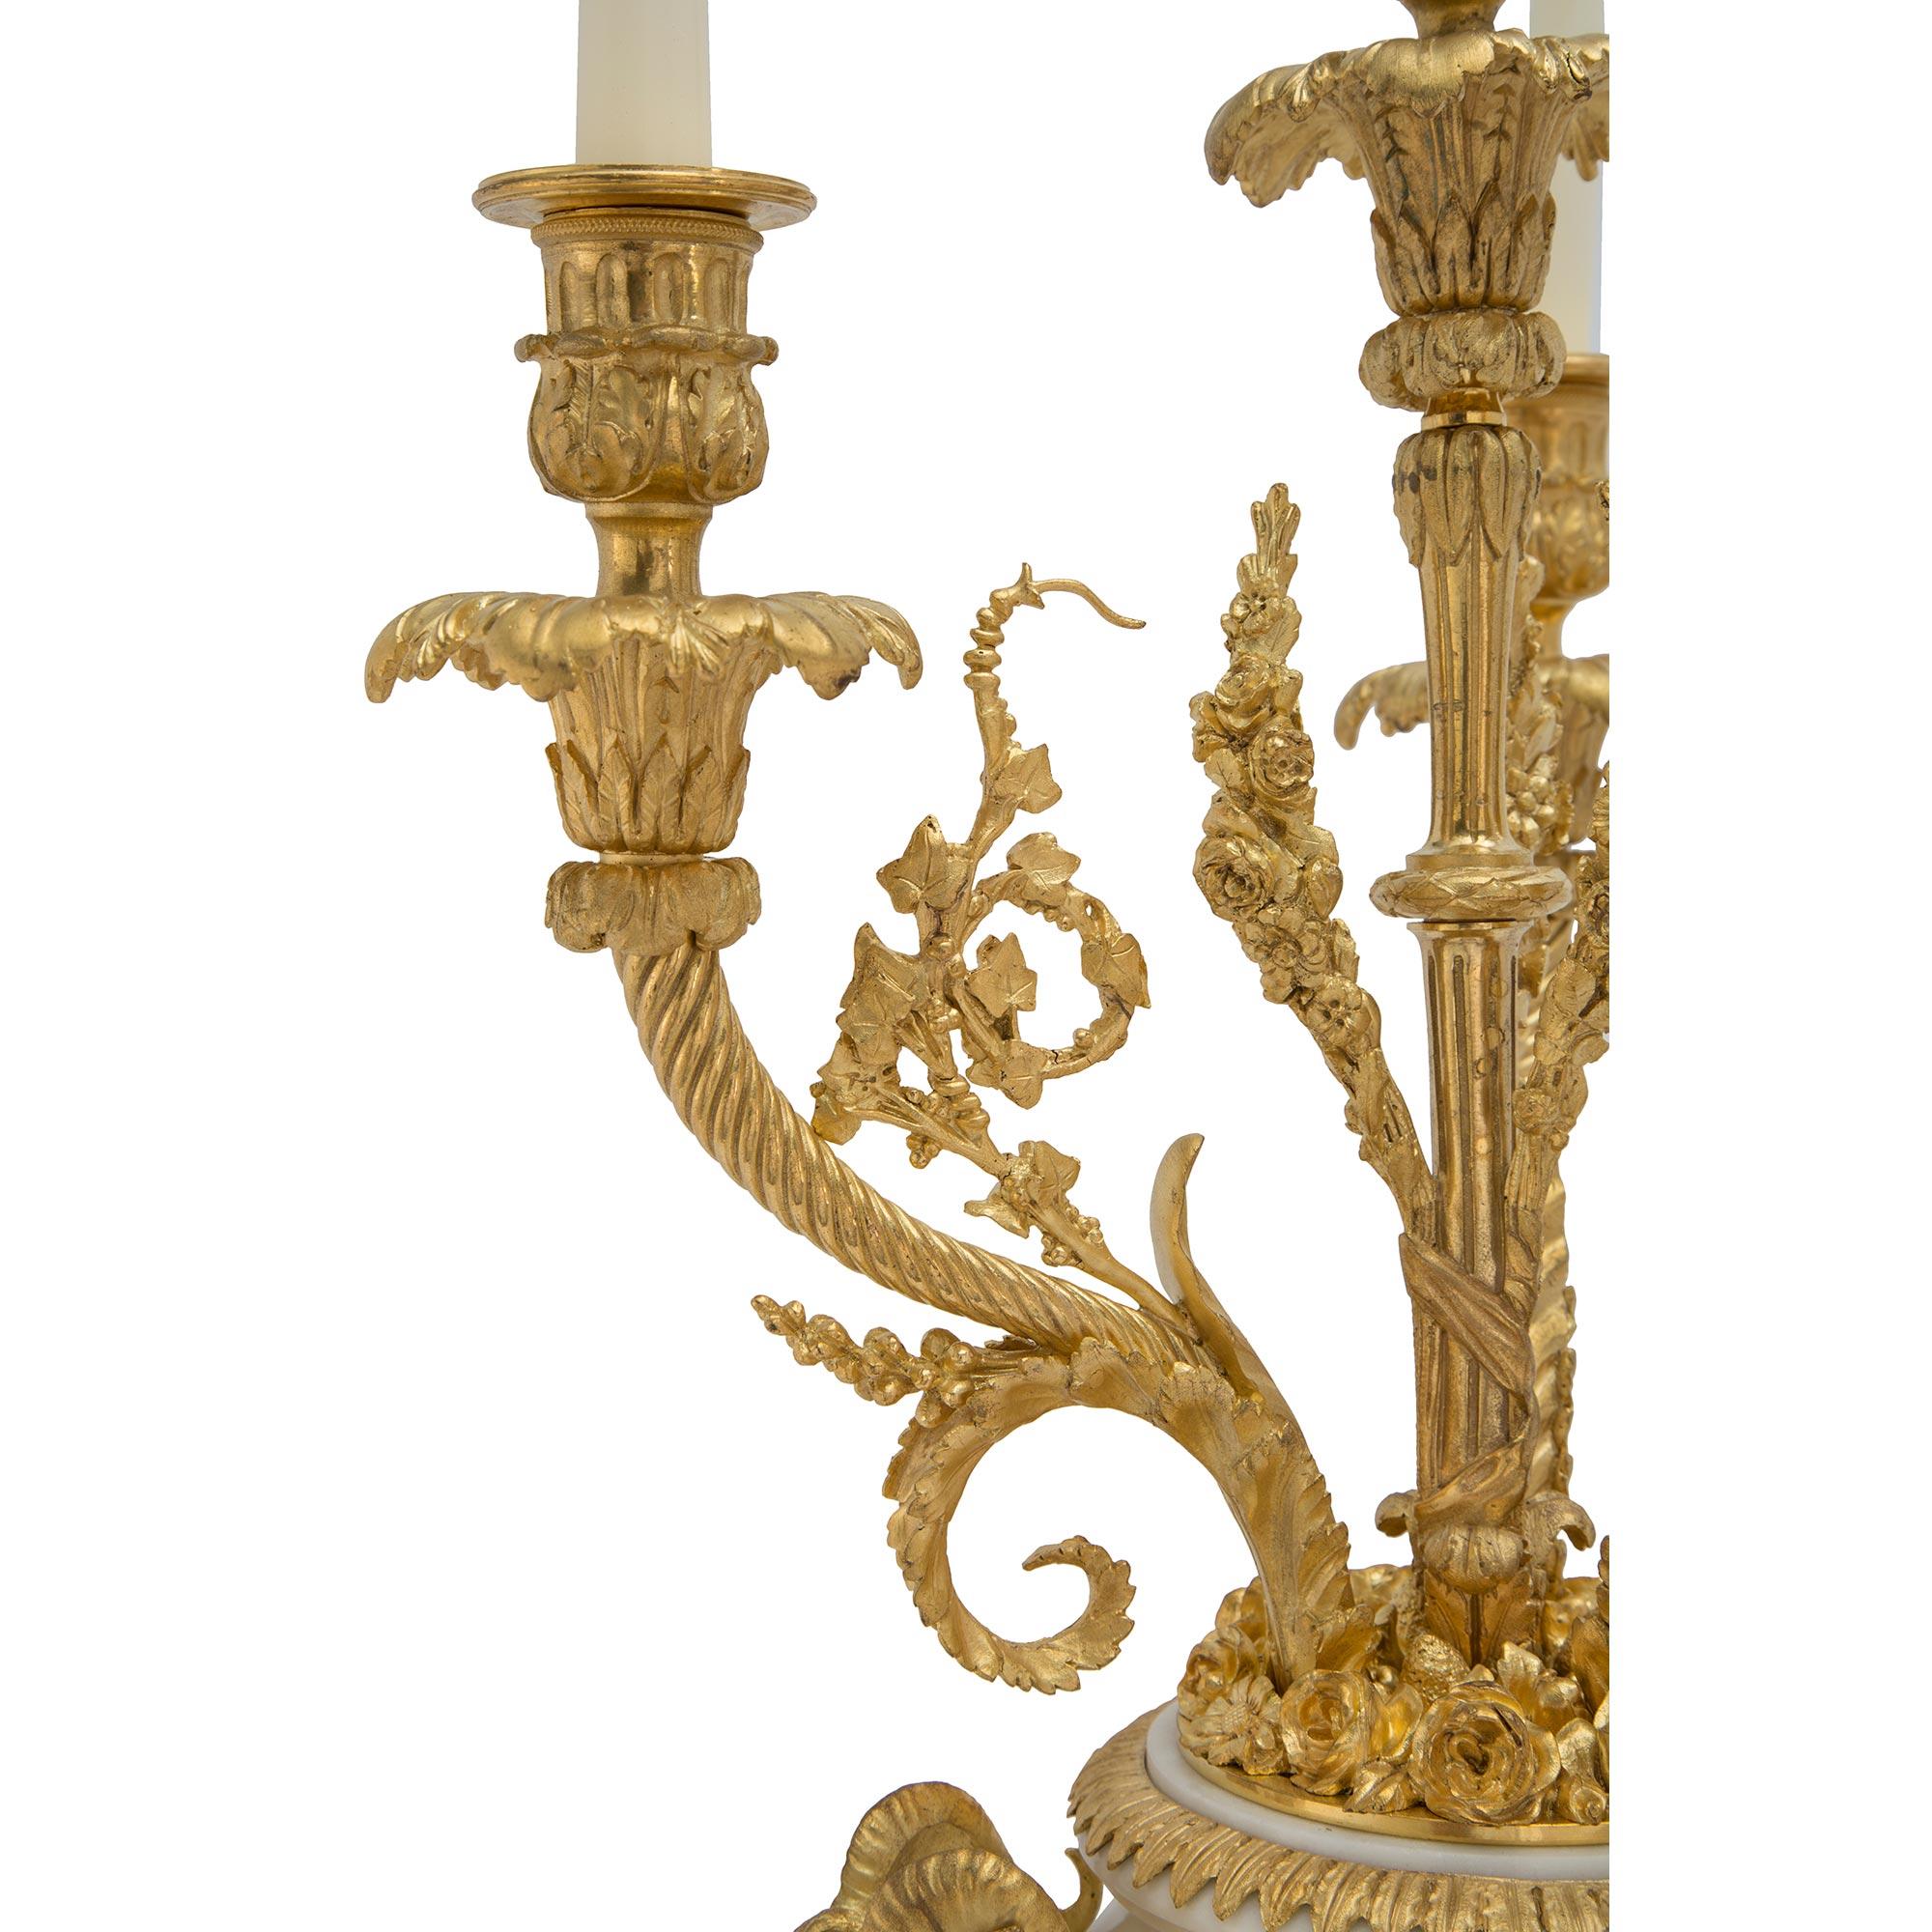 French 19th Century Louis XVI St. Marble and Ormolu Candelabras Lamps For Sale 2